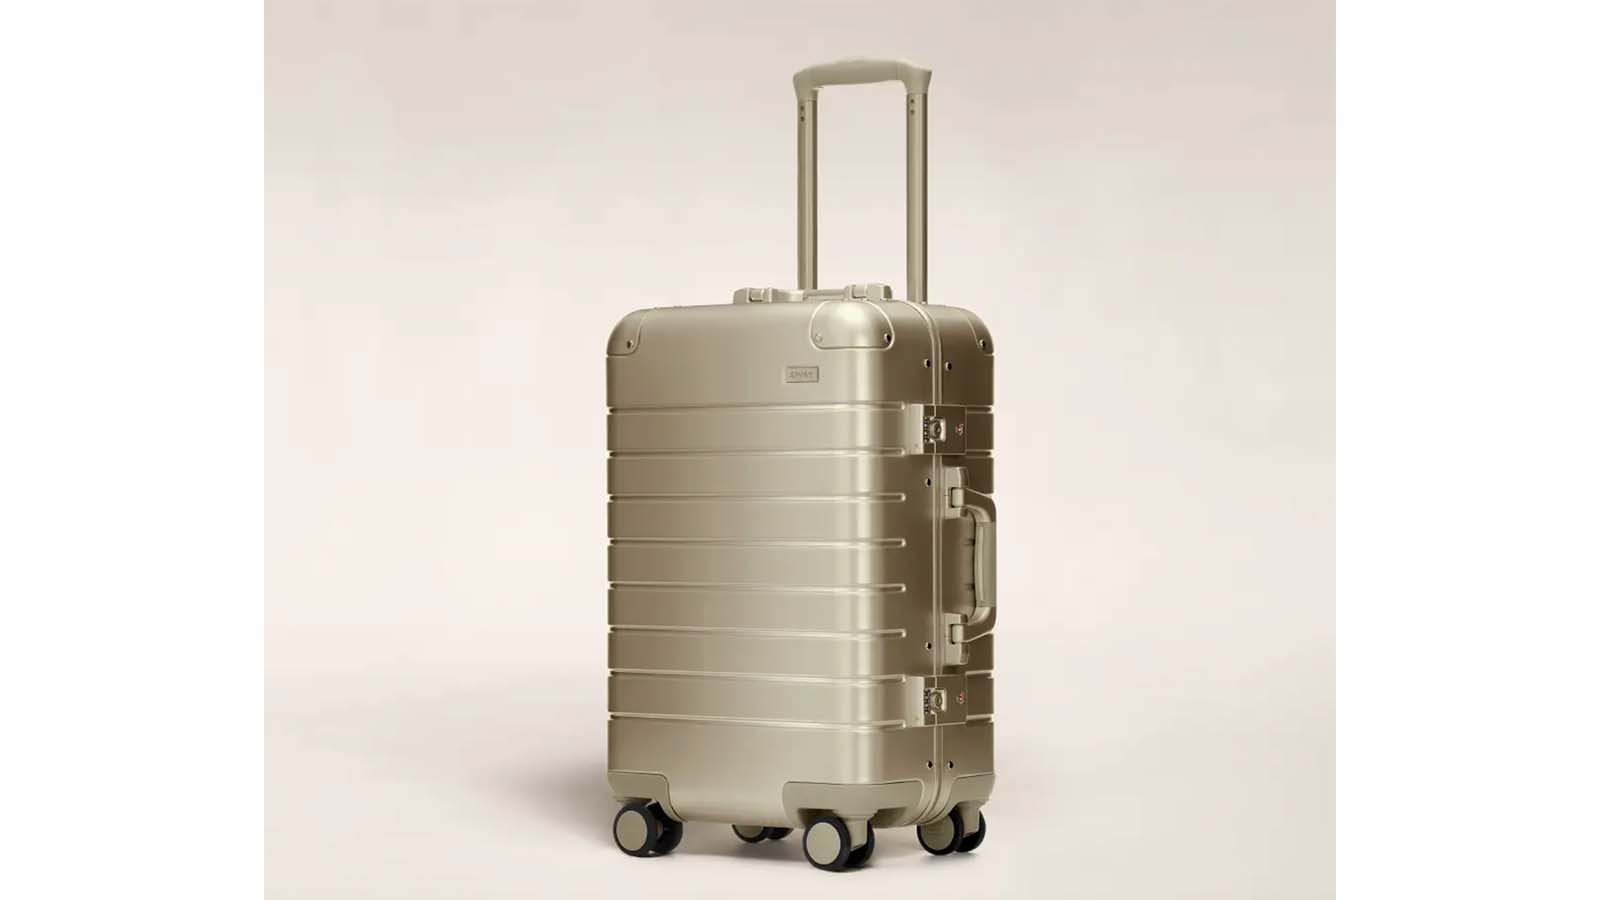 Away Black Friday sale: Minis at $30, luggage sets discounted